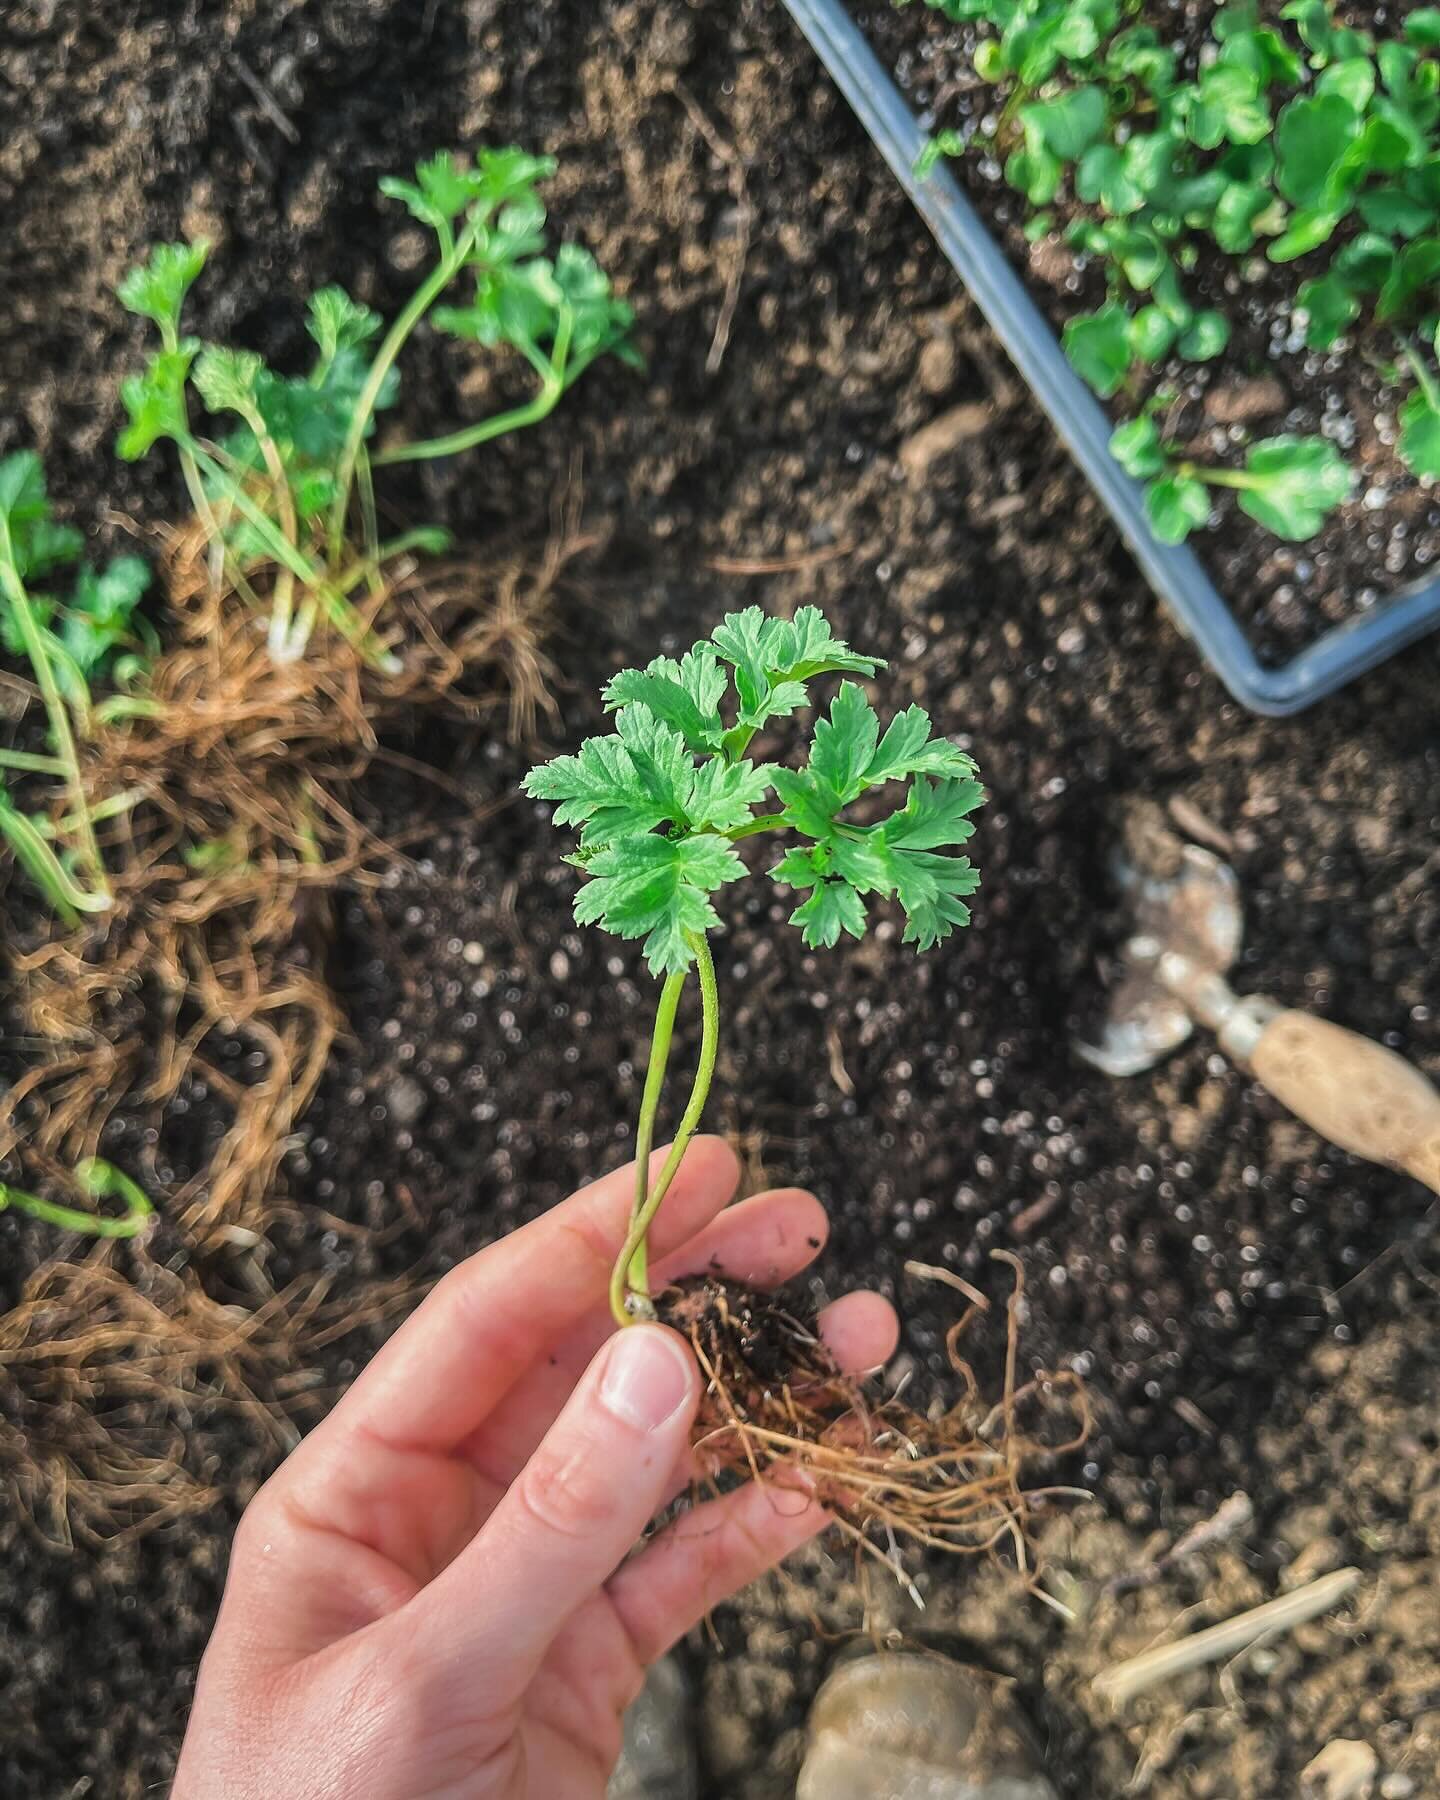 a n e m o n e s &mdash; 🌱

it was a GOOD freakin&rsquo; day today. The sun was shining, I planted all of the anemones outside wearing a T-SHIRT on March 4th.. like what?! 😂 

It felt sooooo good to get my hands back in the dirt. Ranunculus will hav